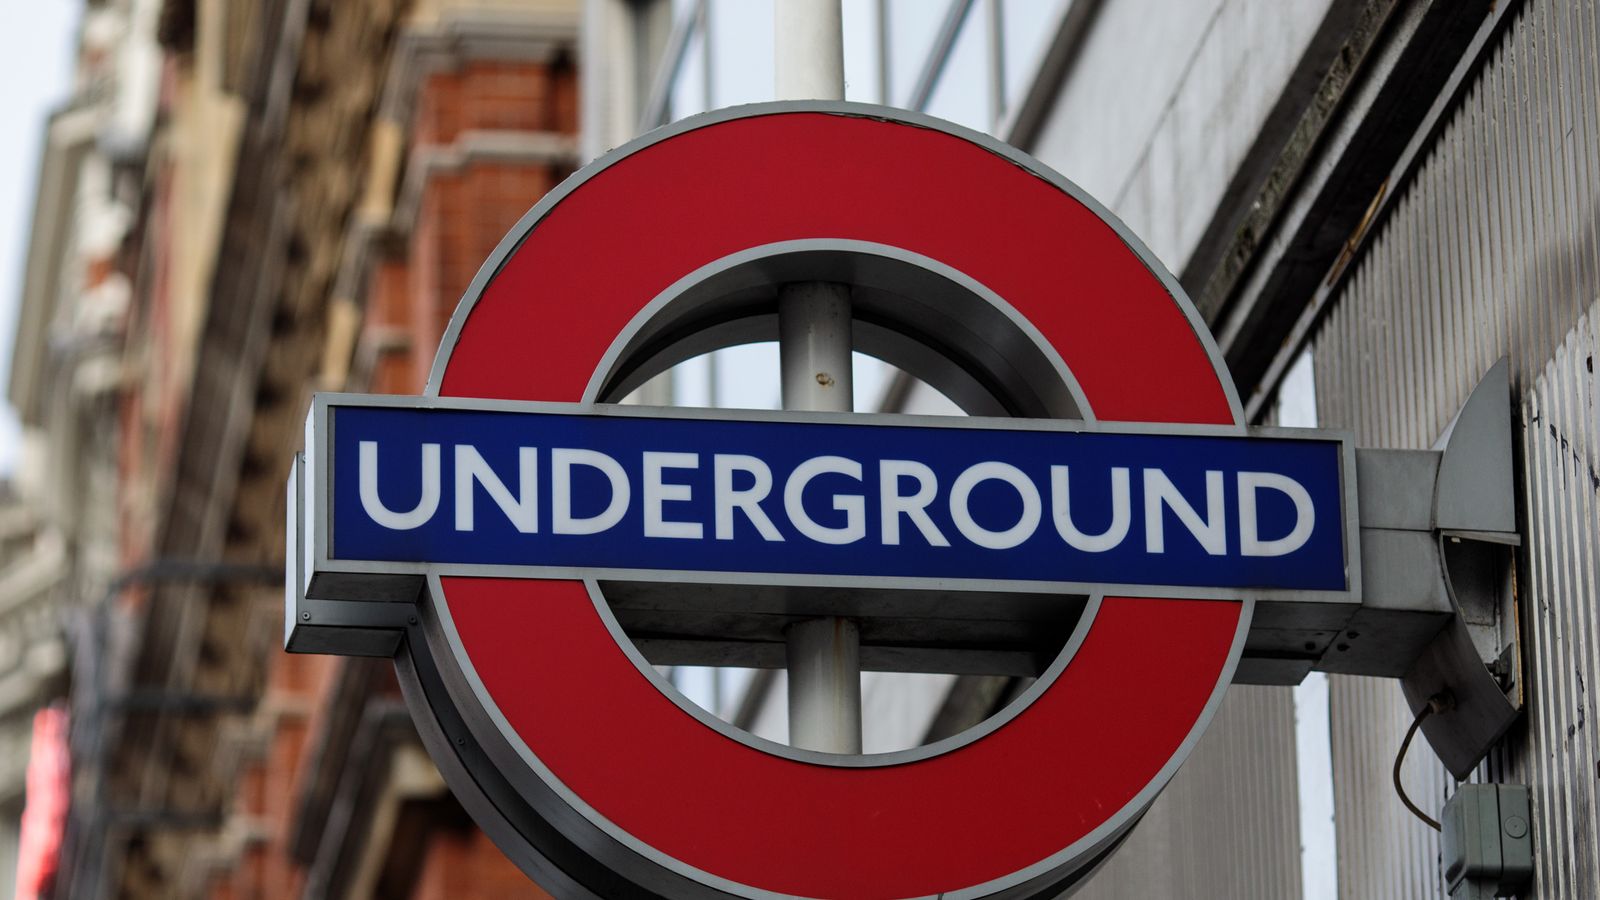 Sky Views: TfL is in trouble - but has anyone noticed ...